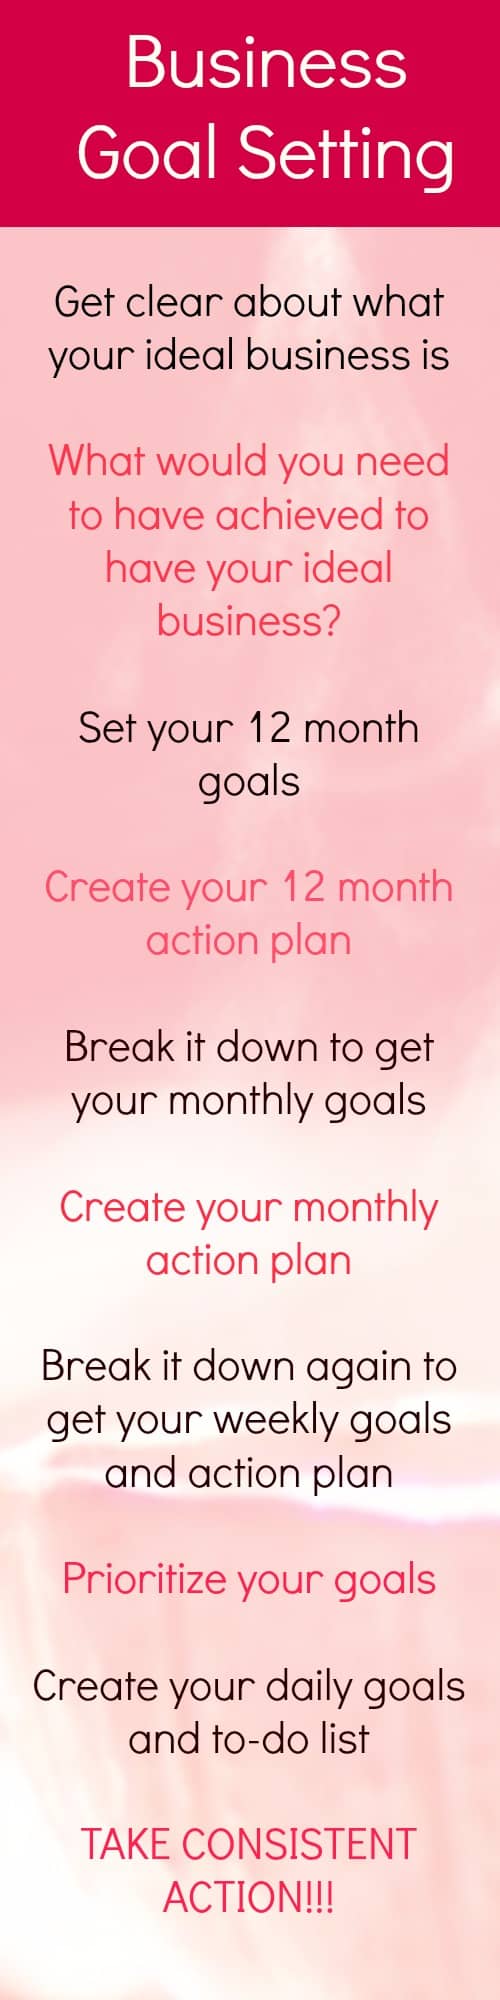 10 tips to help you set effective business goals. Tips and replay of the live training.